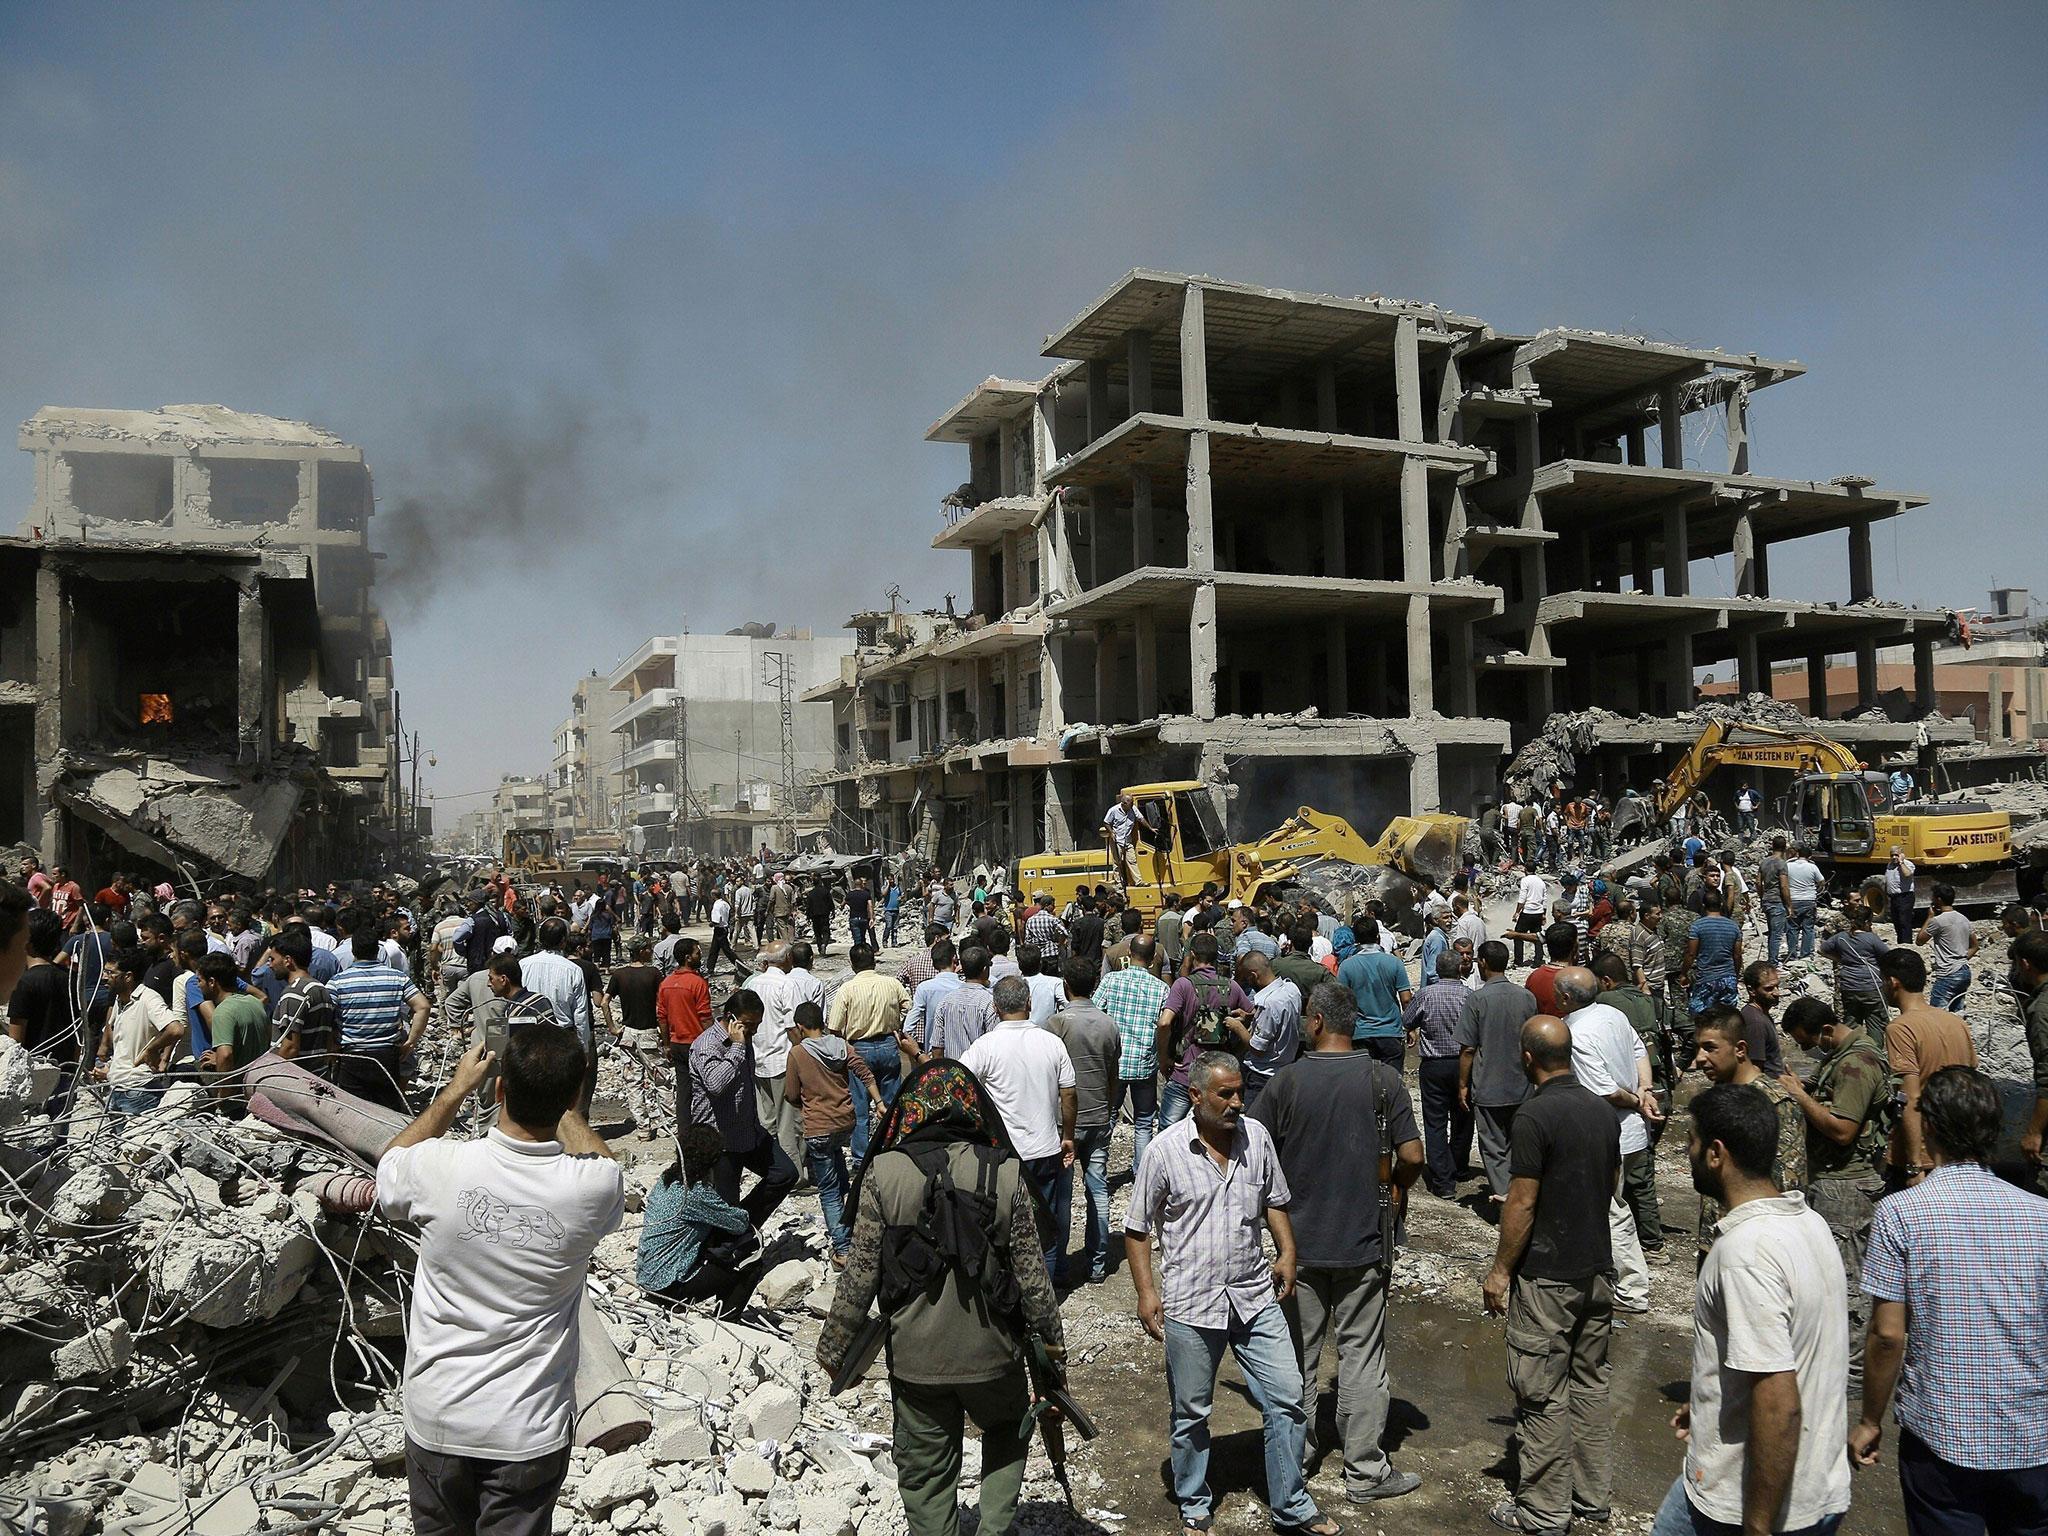 Syrians gather at the site of a bomb attack in Syria's northeastern city of Qamishli on 27 July, 2016